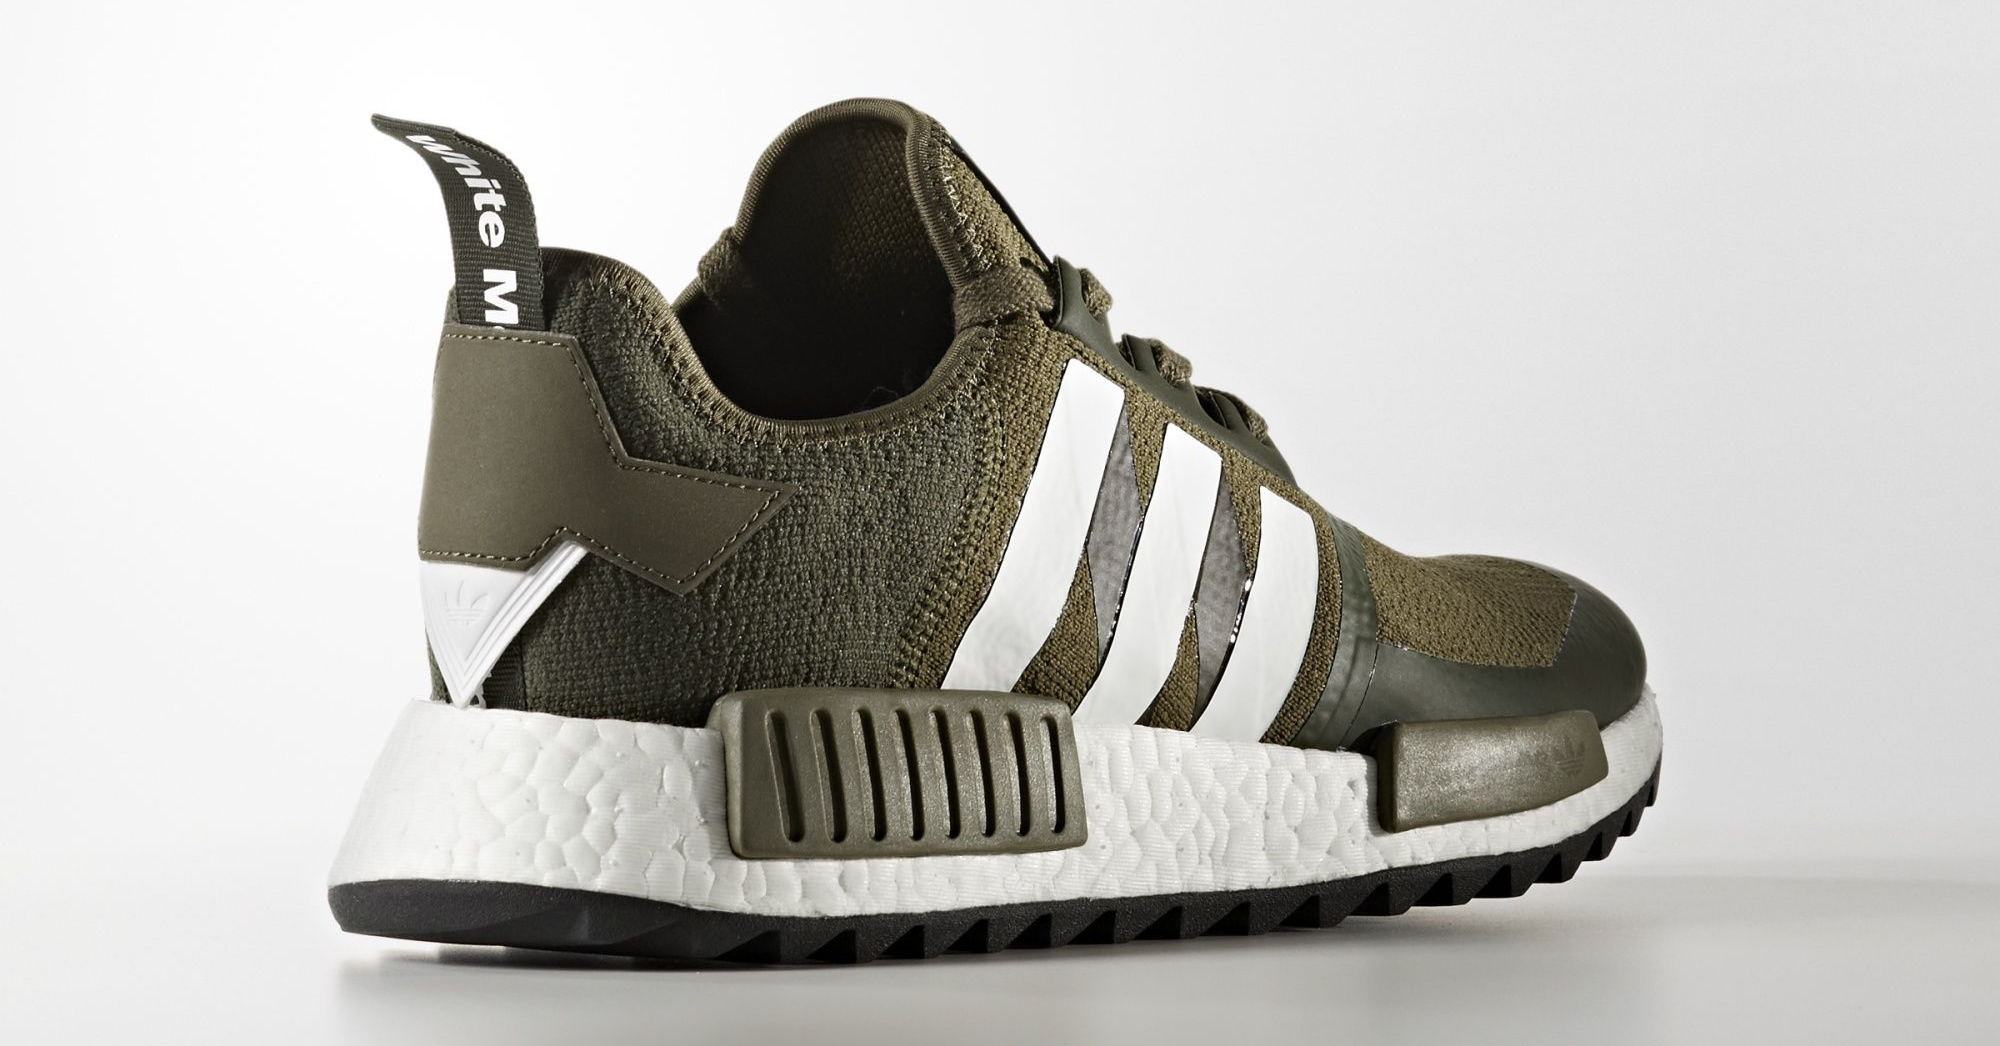 adidas-nmd_r1-trail-pk-x-white-mountaineering-trace-olive-1